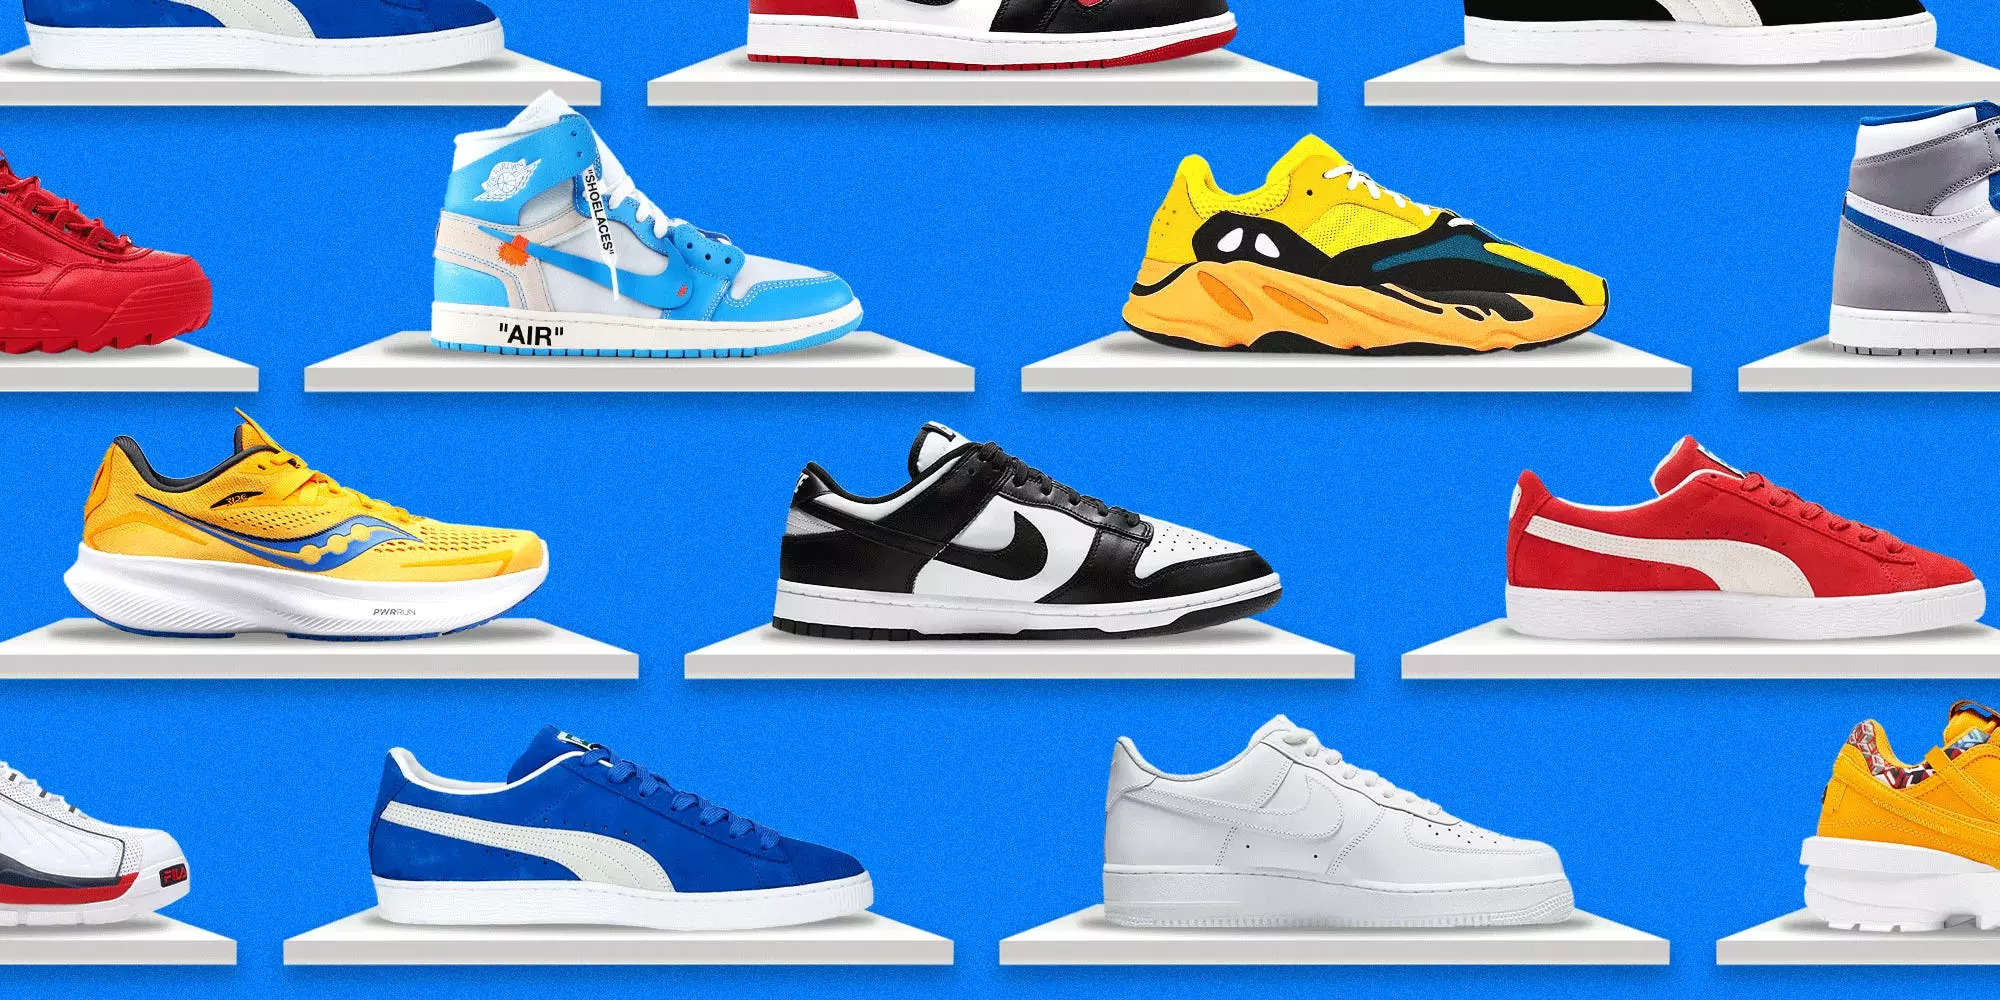 It's the perfect time to start your sneaker collection | Business ...